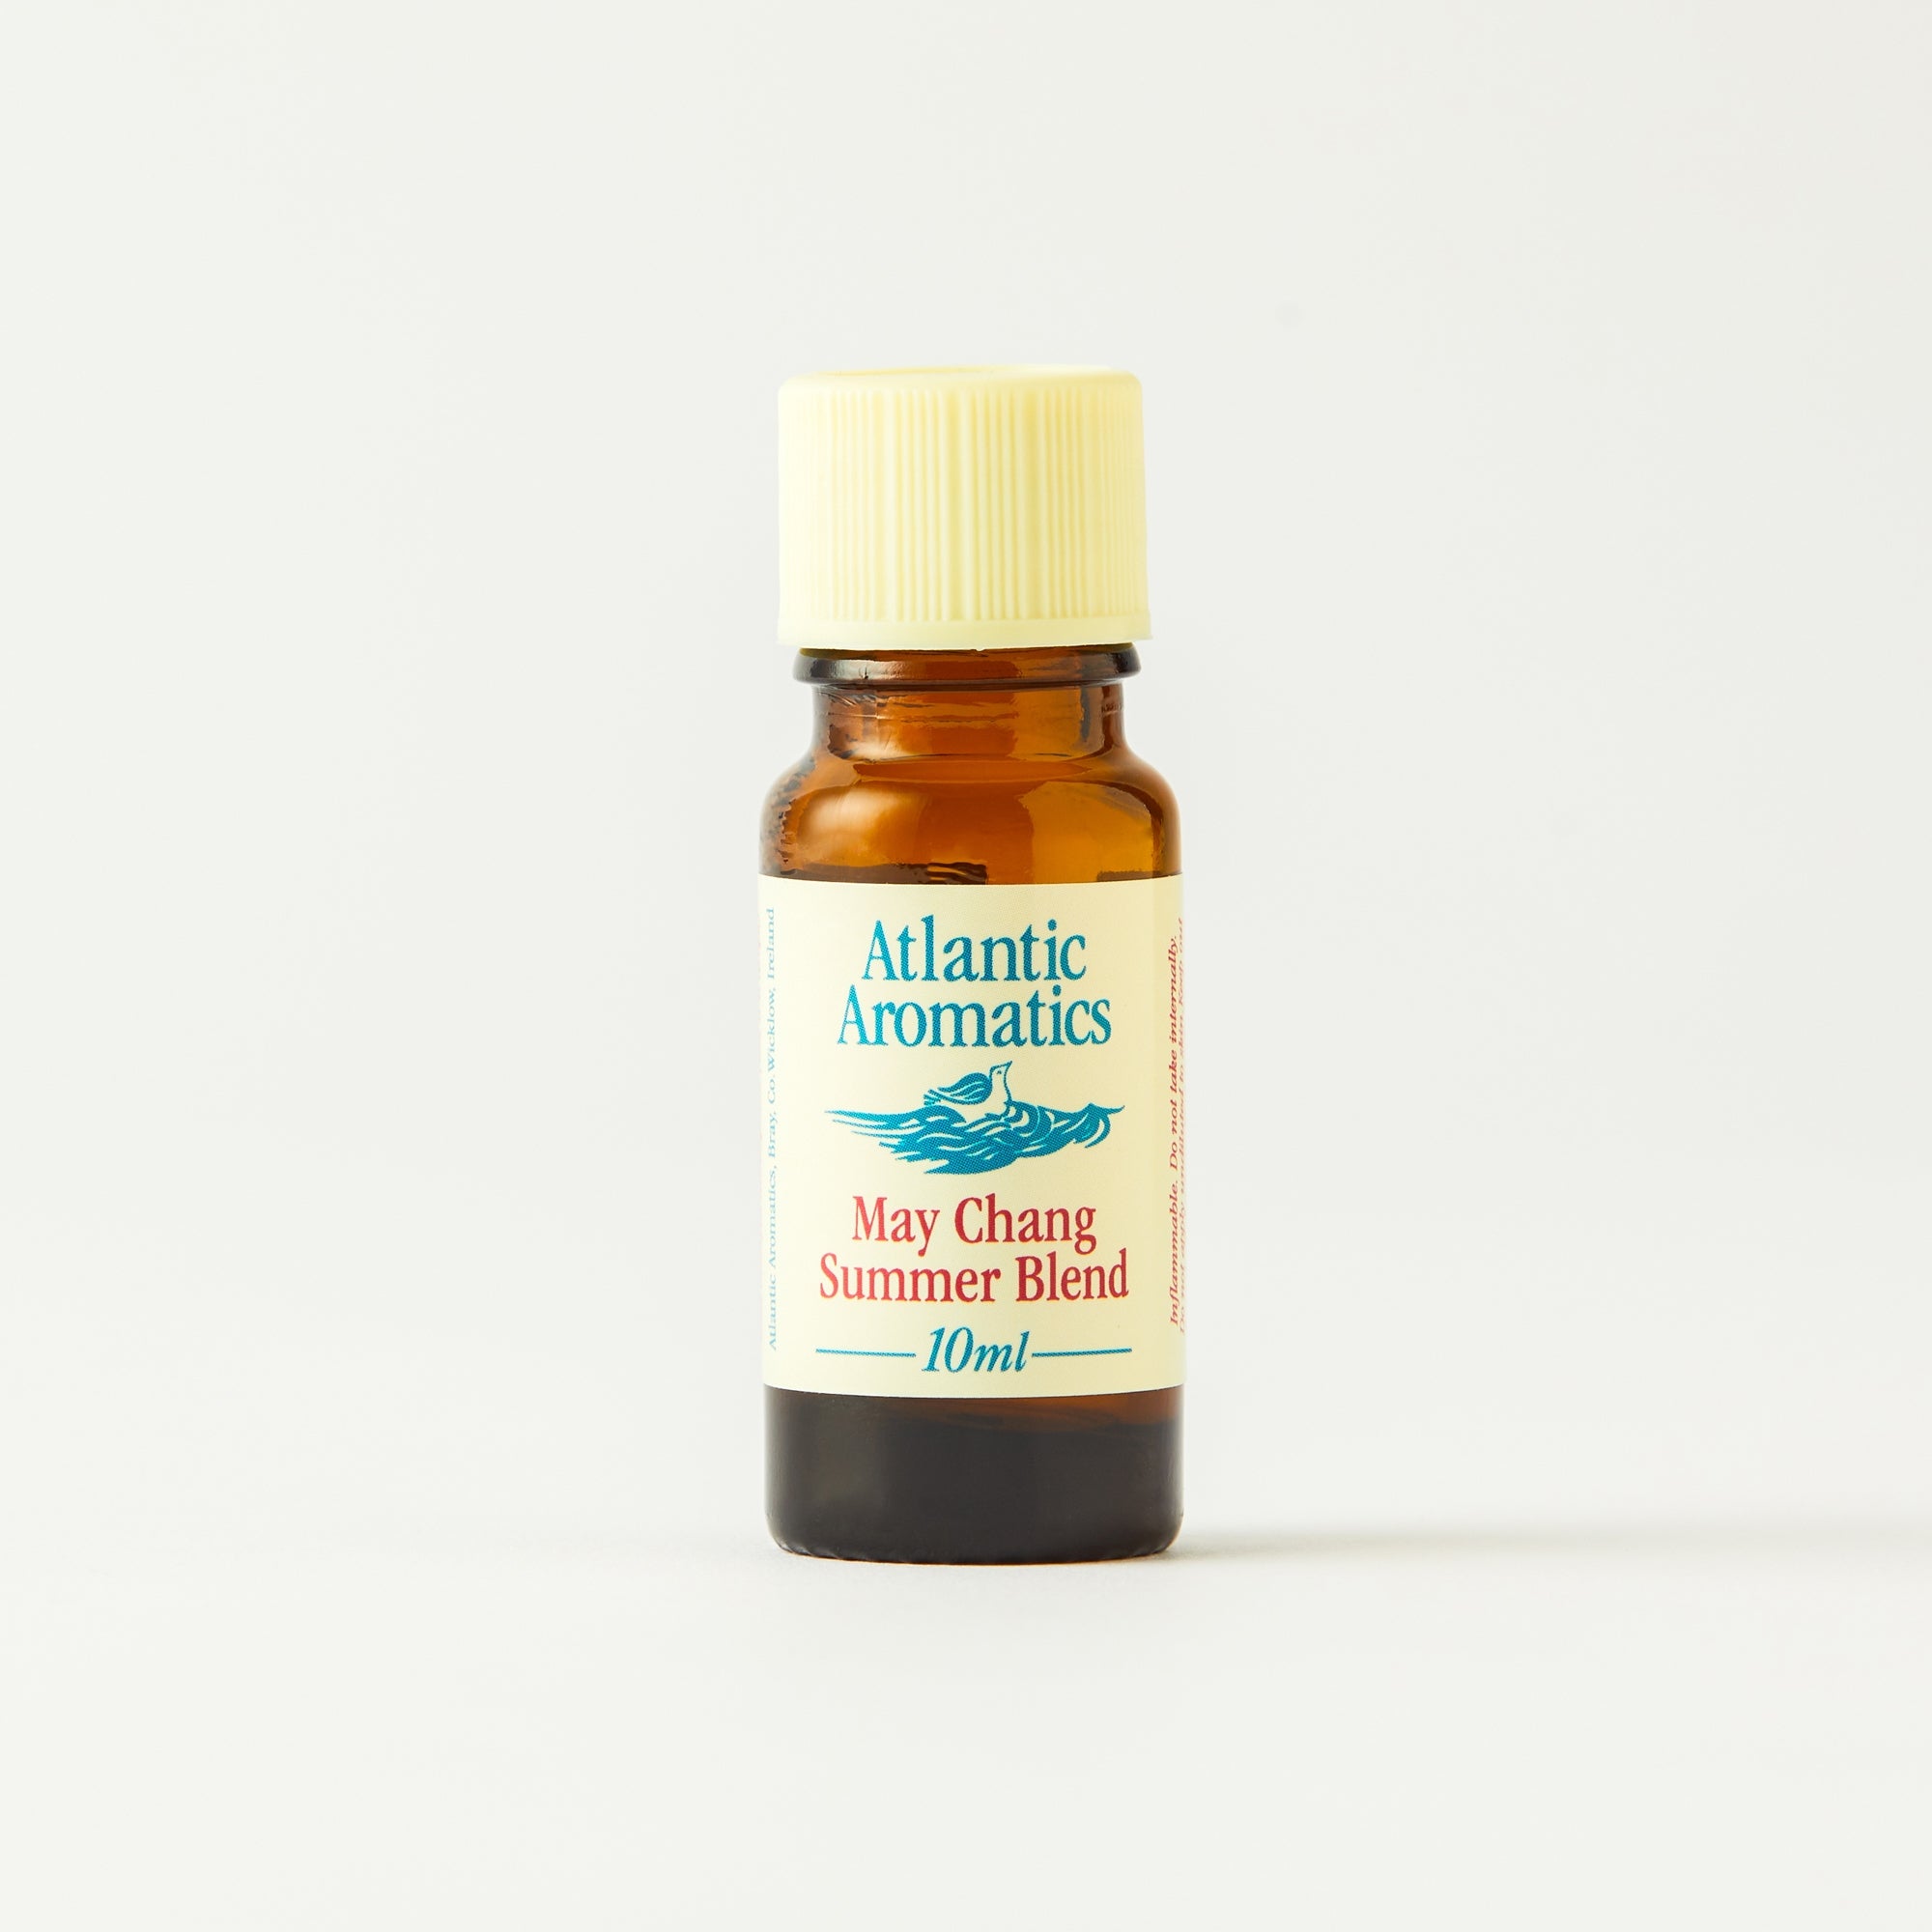 bottle of Atlantic Aromatics May Chang Summer Blend Essential Oil